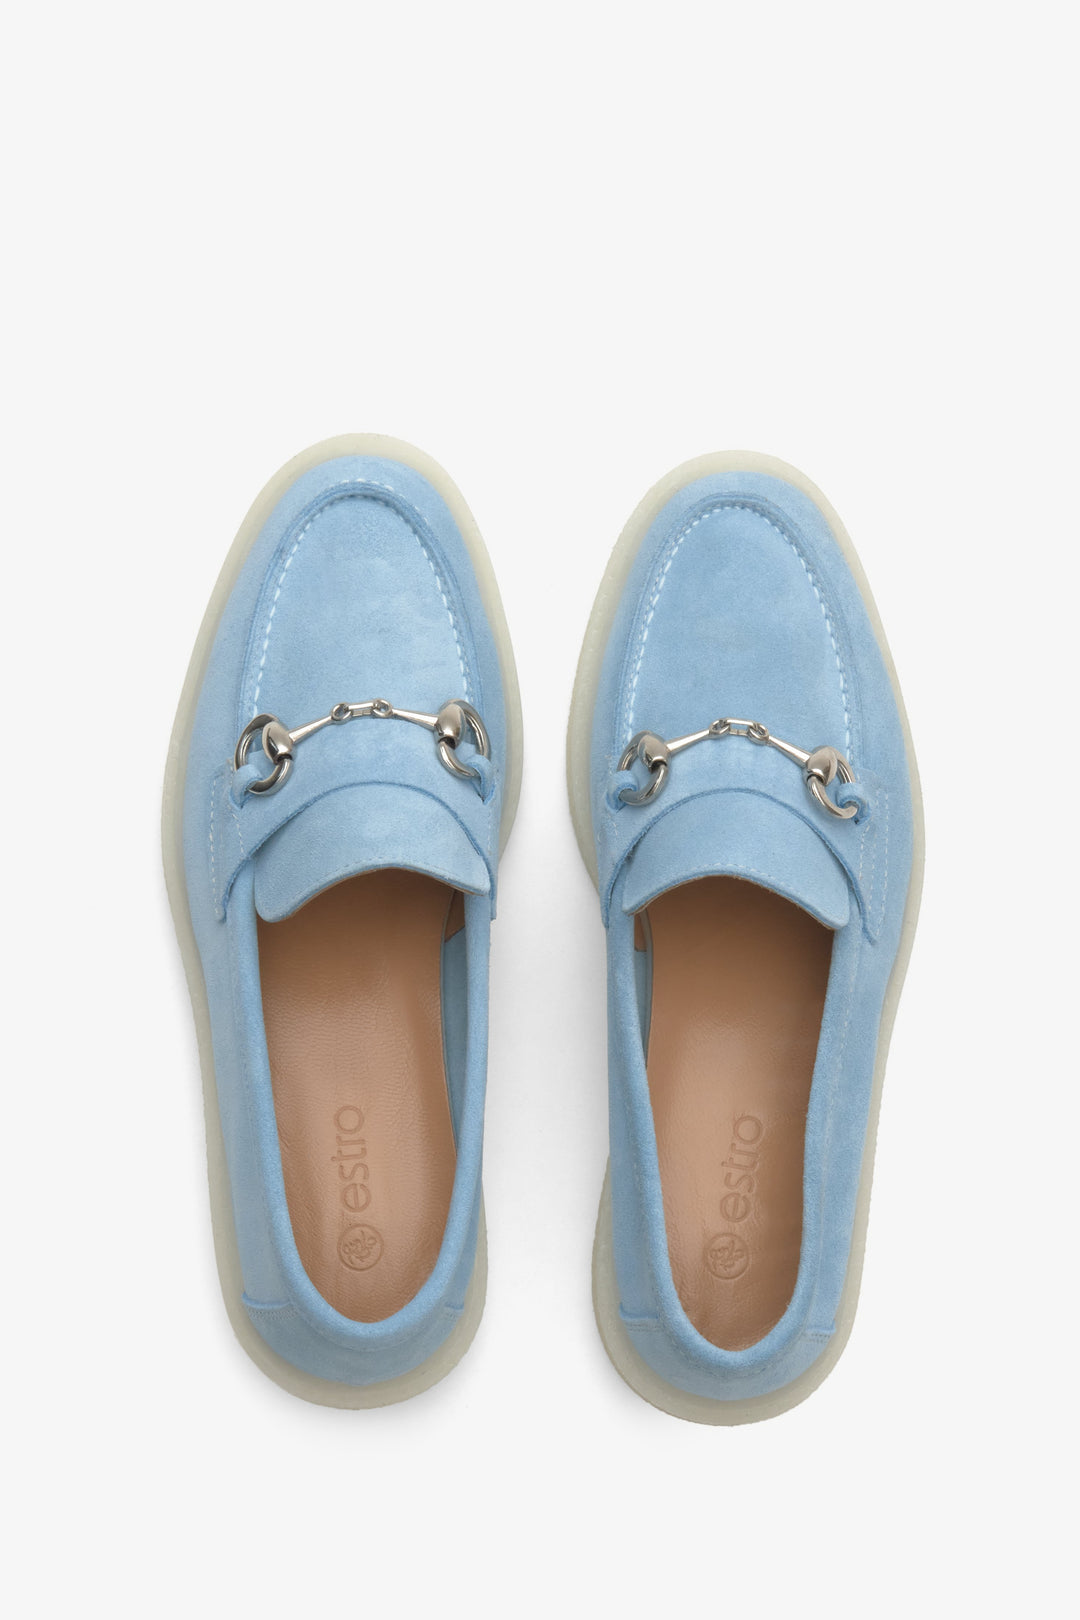 Light blue women's loafers made of velour and leather by Estro